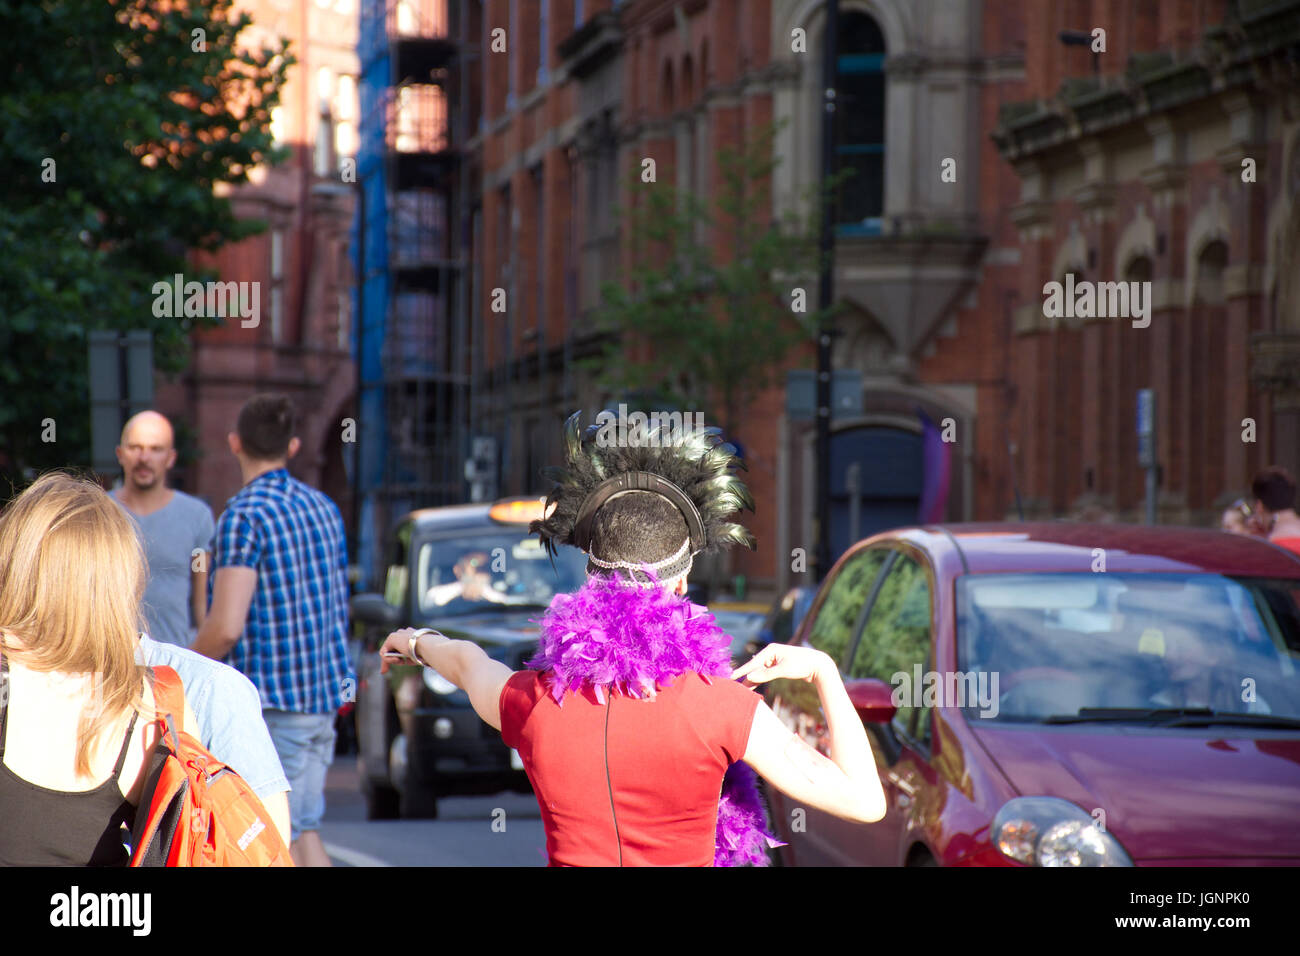 Manchester, UK. 08th July, 2017. Sparkle transgender pride, drag queen walking down the street.Credit: JazzLove/Alamy Live News Stock Photo